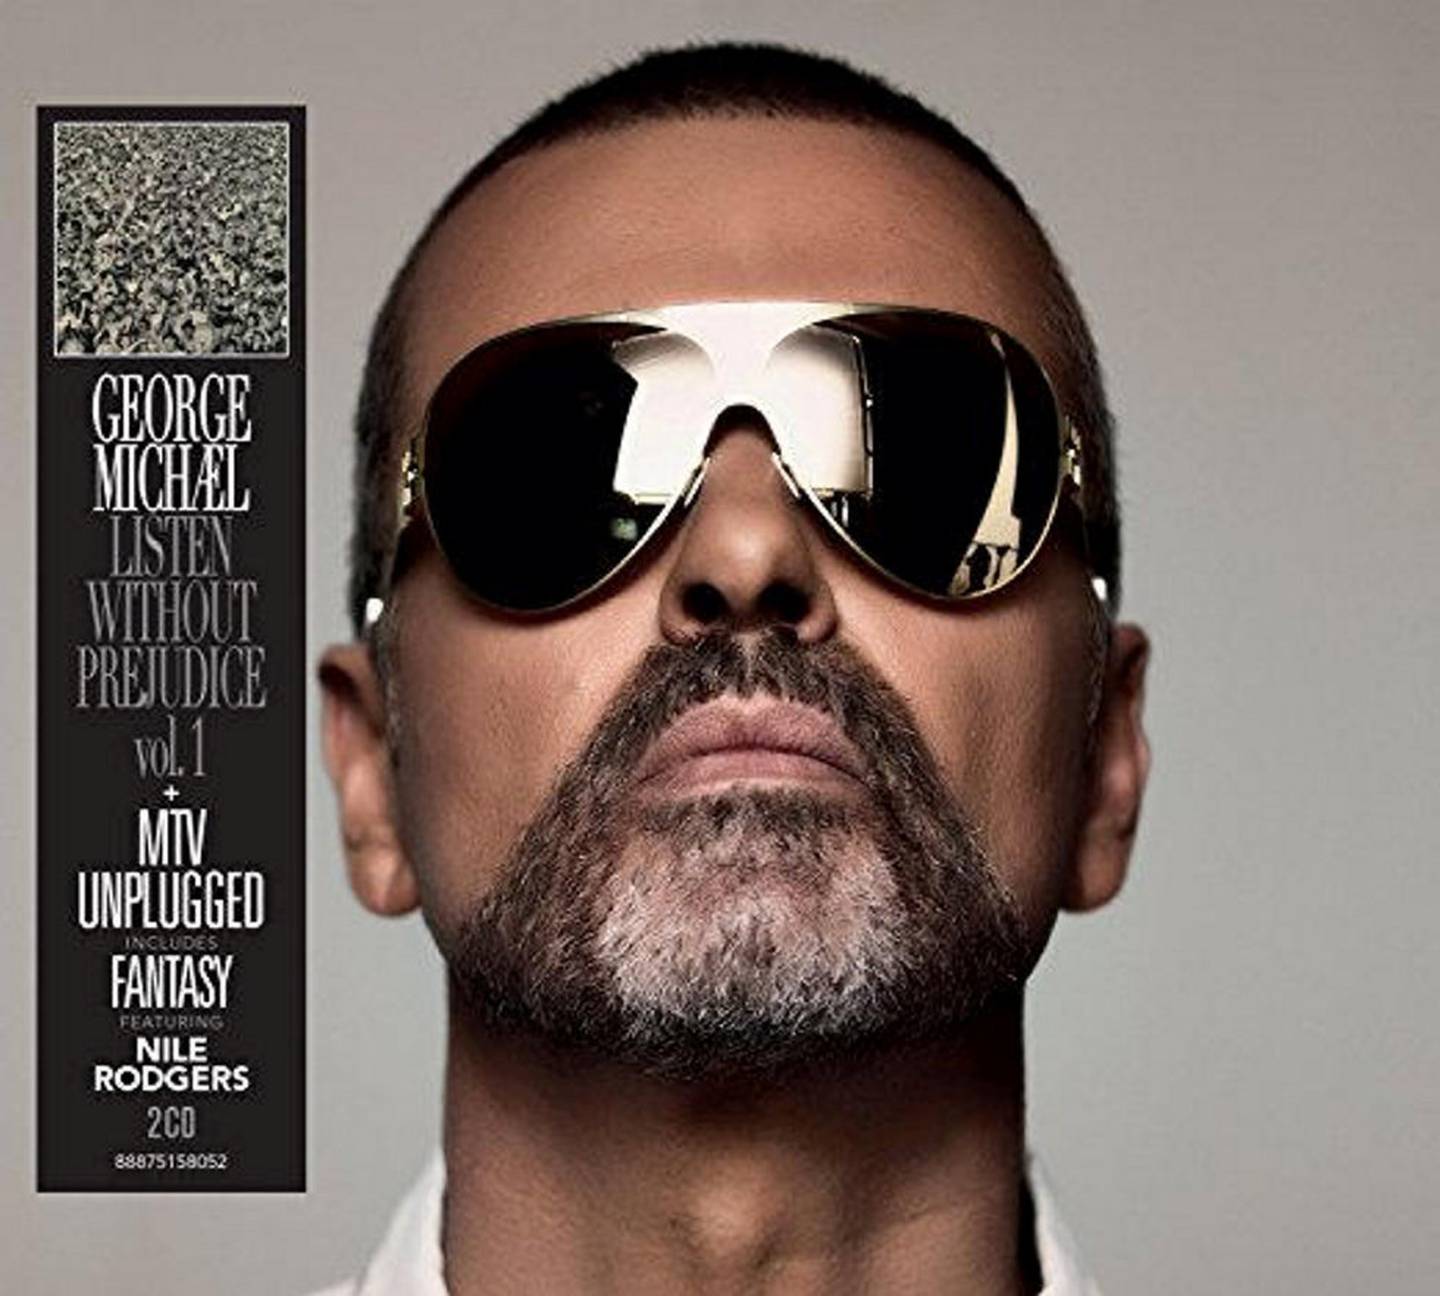 George Michael,«Listen Without Prejudice Vol. 1 – 25th Anniversary Edition»,Sony